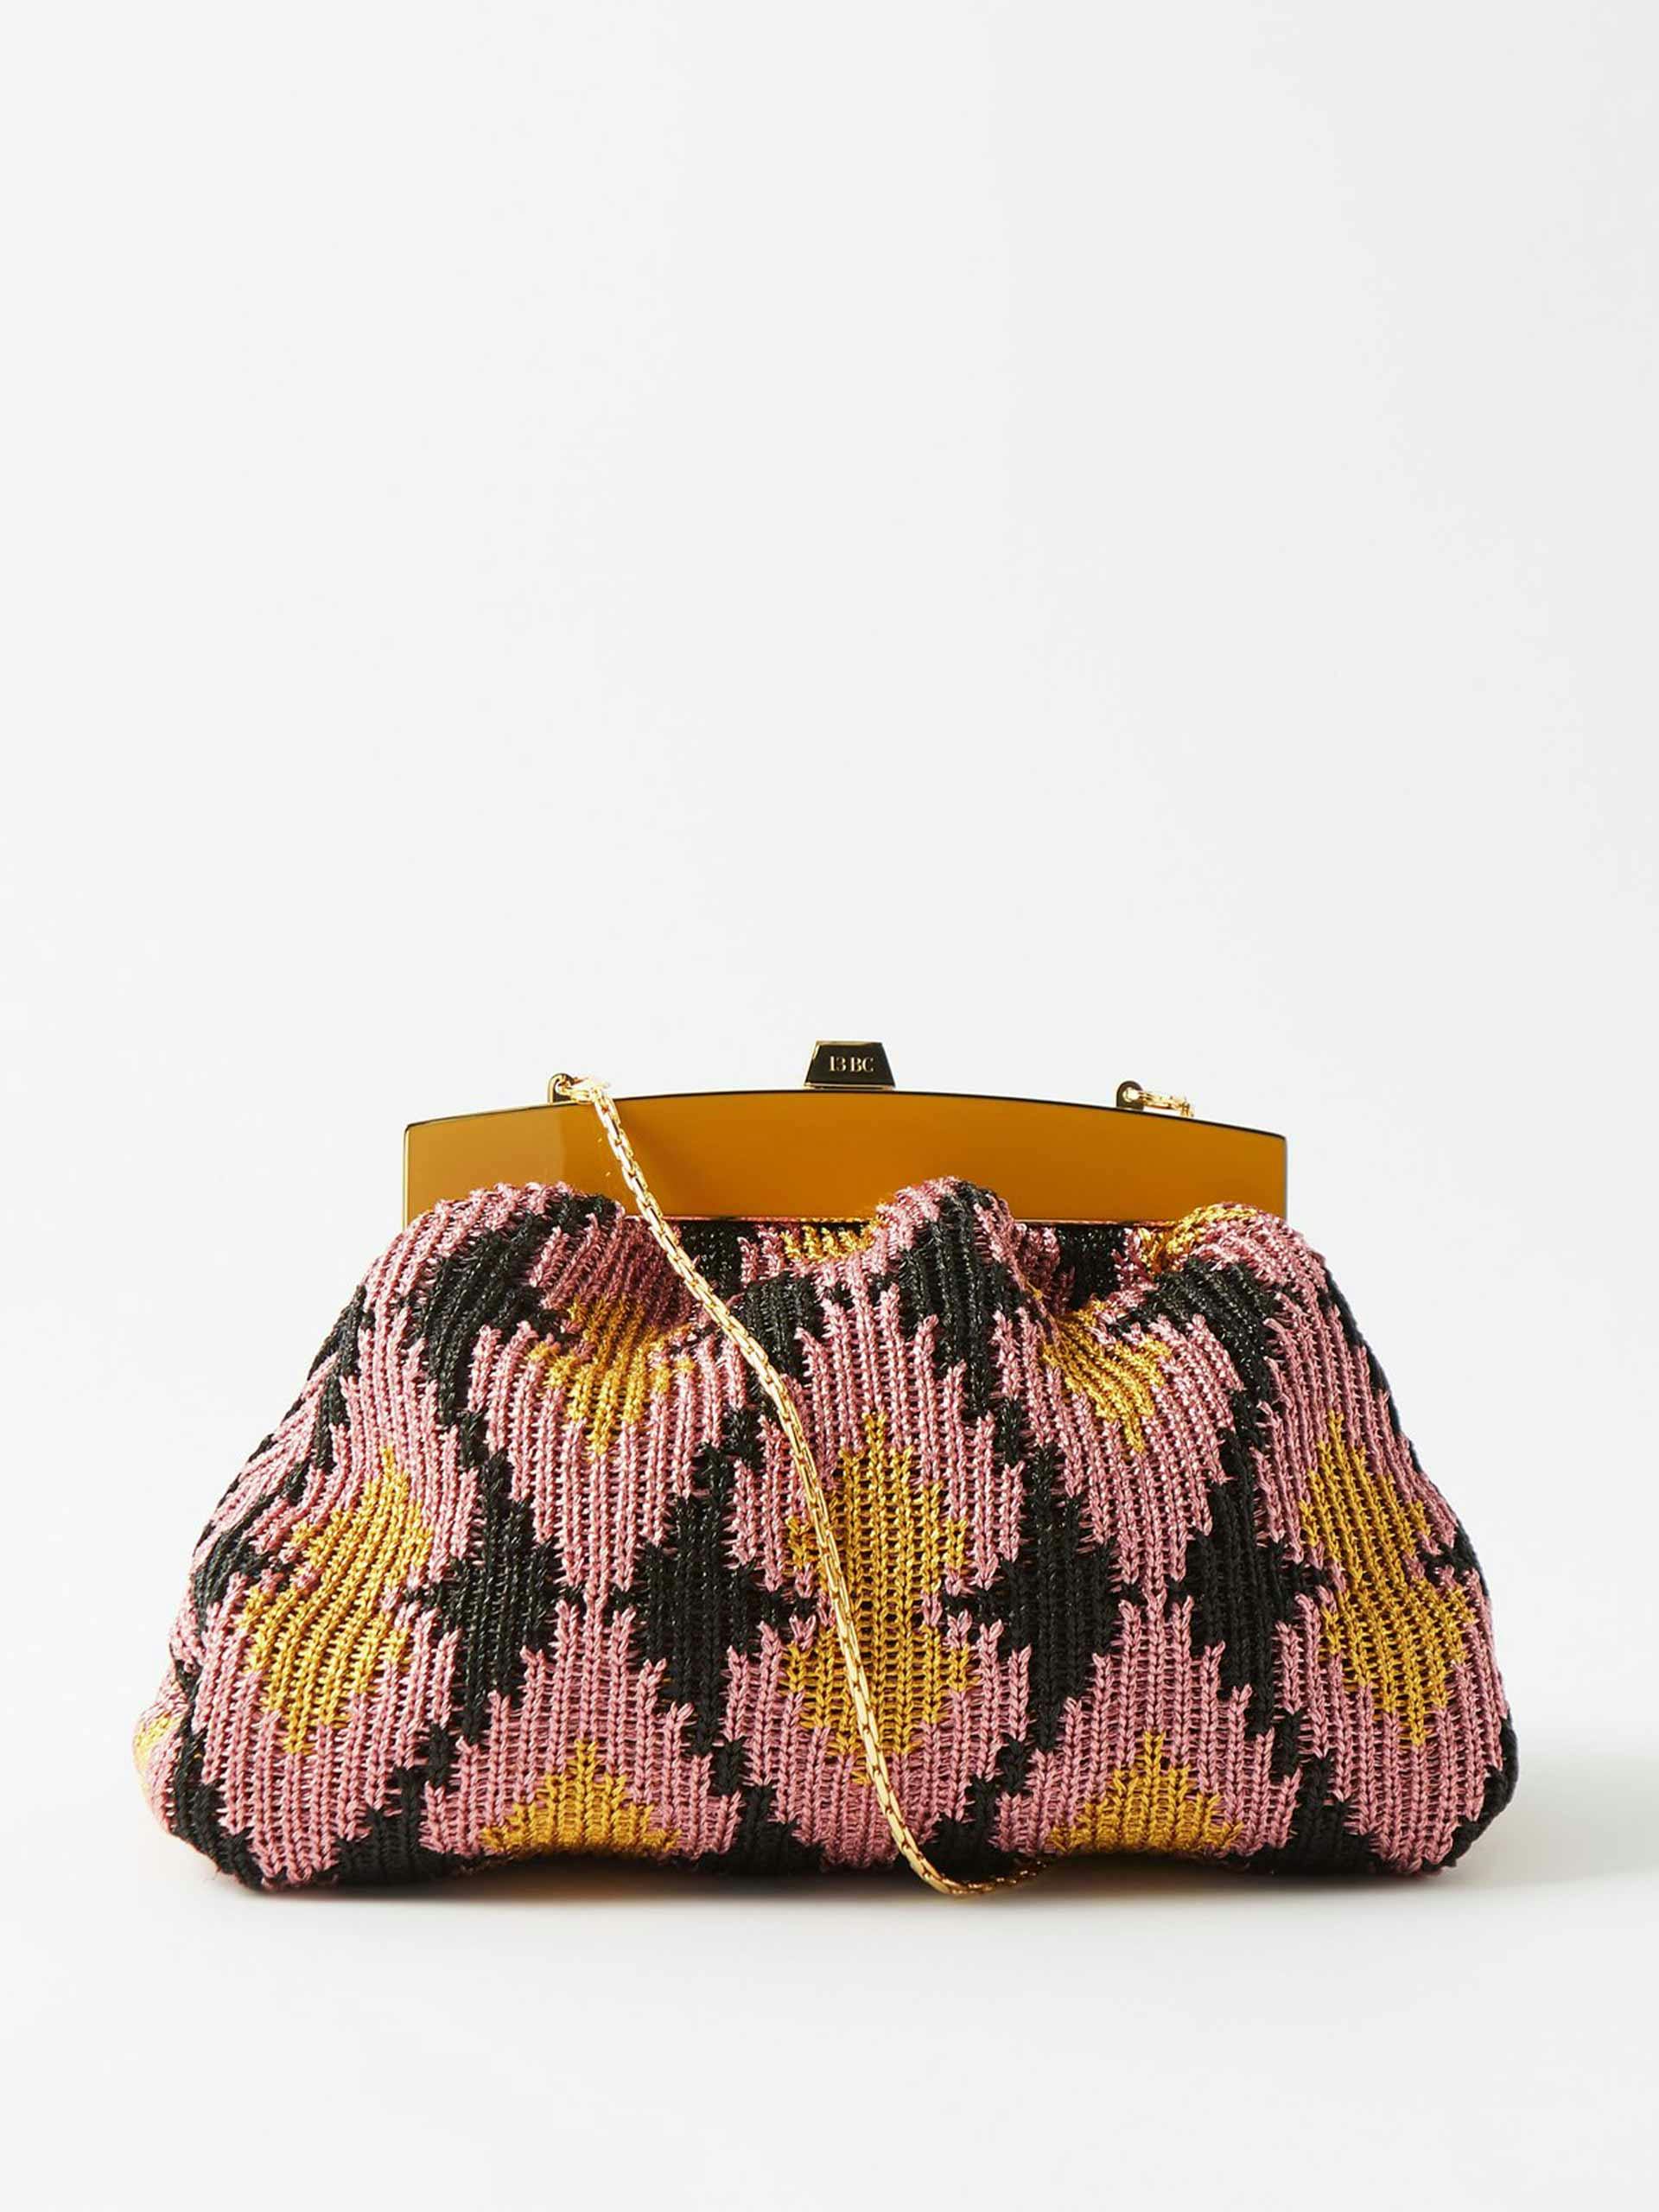 Graphic patterned woven lurex clutch bag